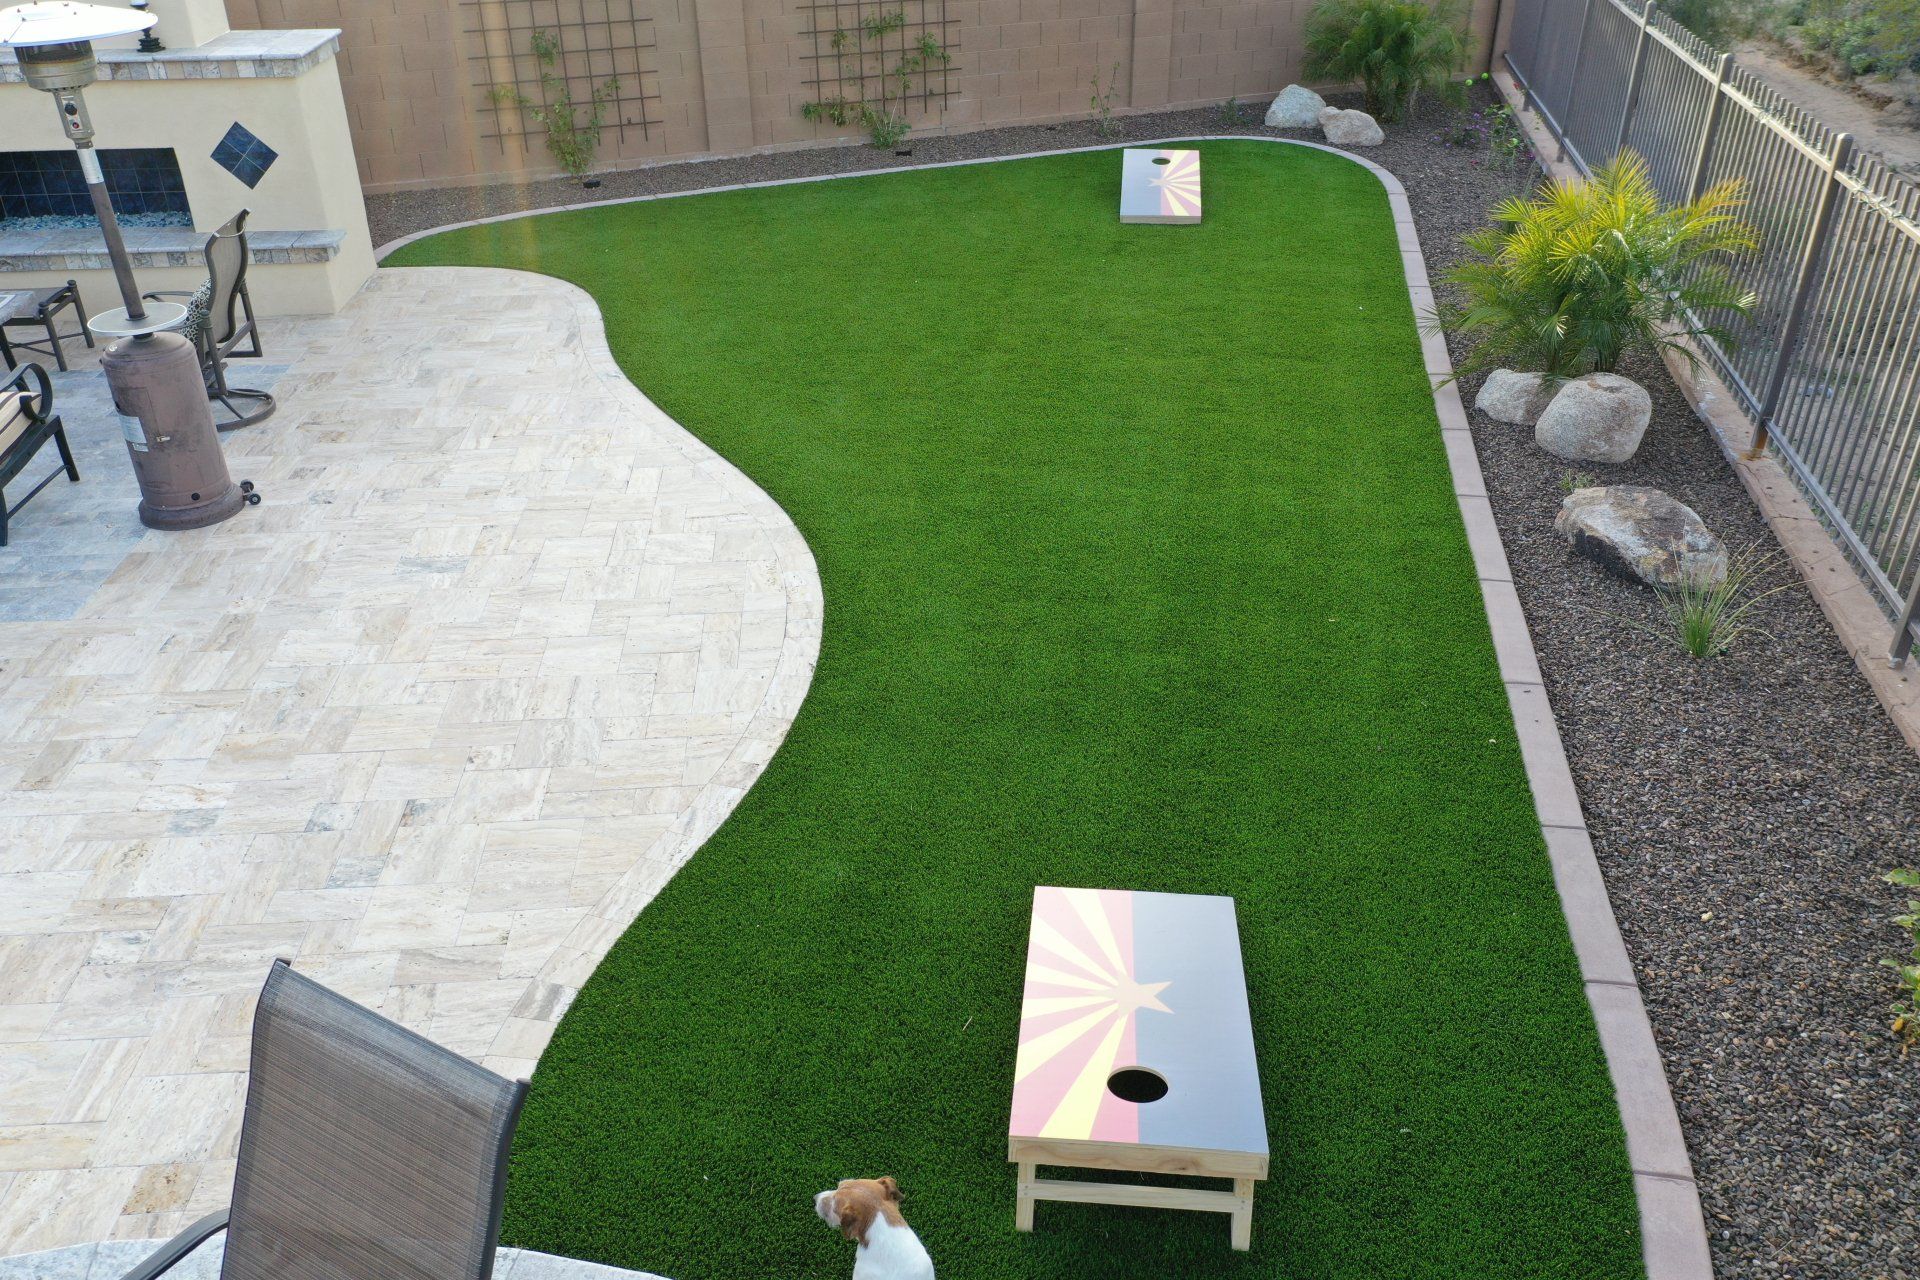 a bird's eye view of an artificial backyard turf landscaped by Reno Turf Masters